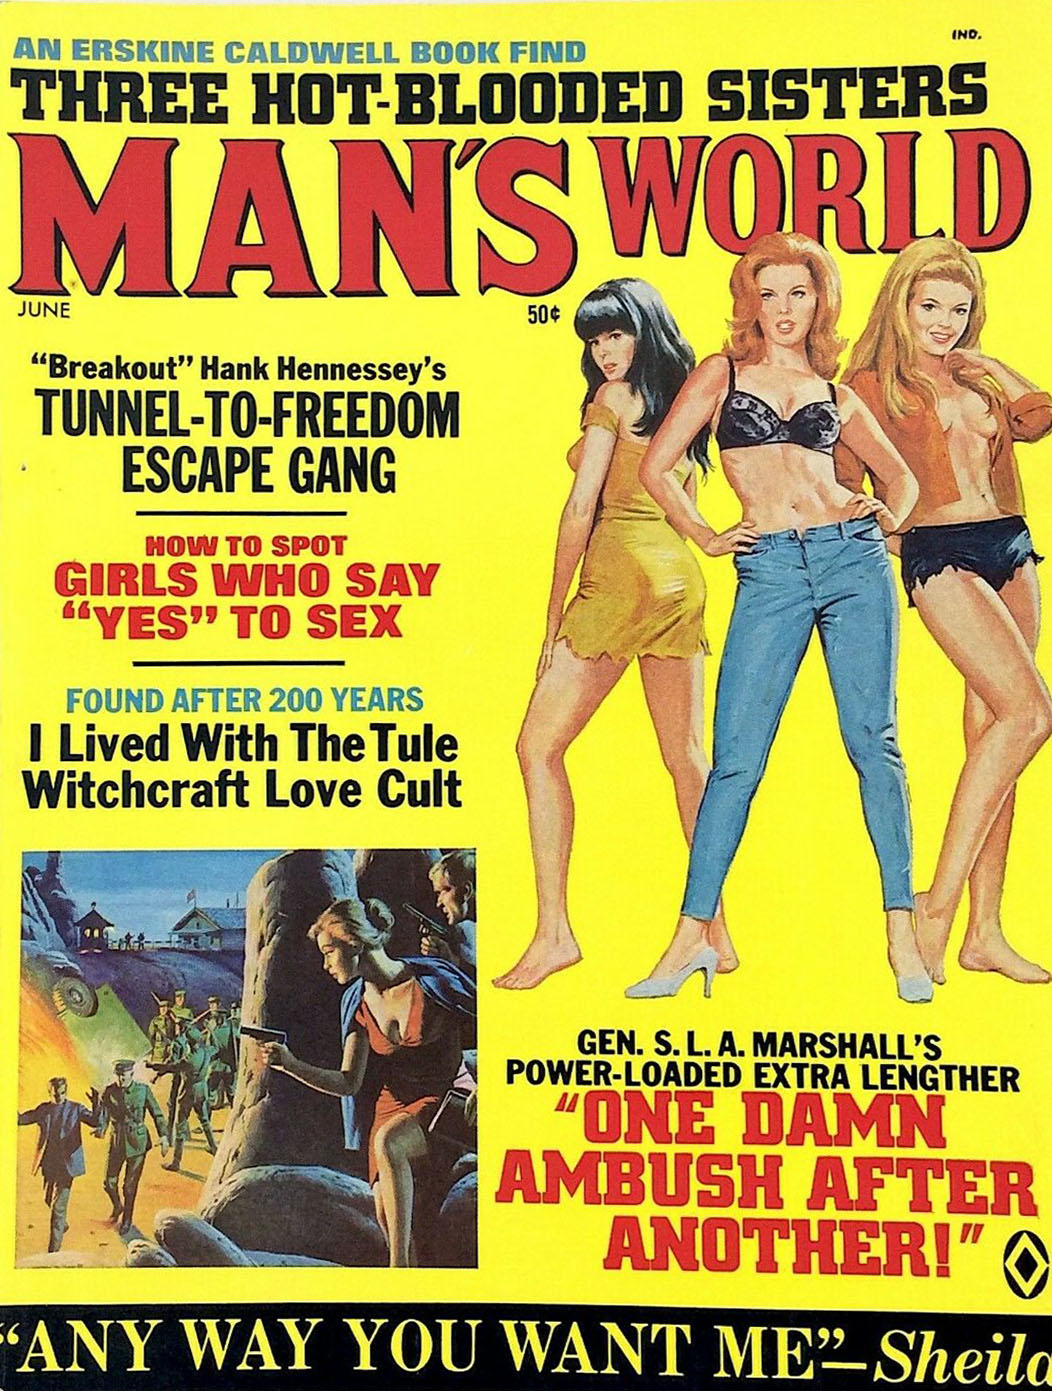 Man's World June 1969 magazine back issue Man's World magizine back copy Man's World June 1969 Adult Mens Magazine Back Issue Published for a Real Mans Needs. An Erskine Caldwell Book Find Three Hot - Blooded Sisters.